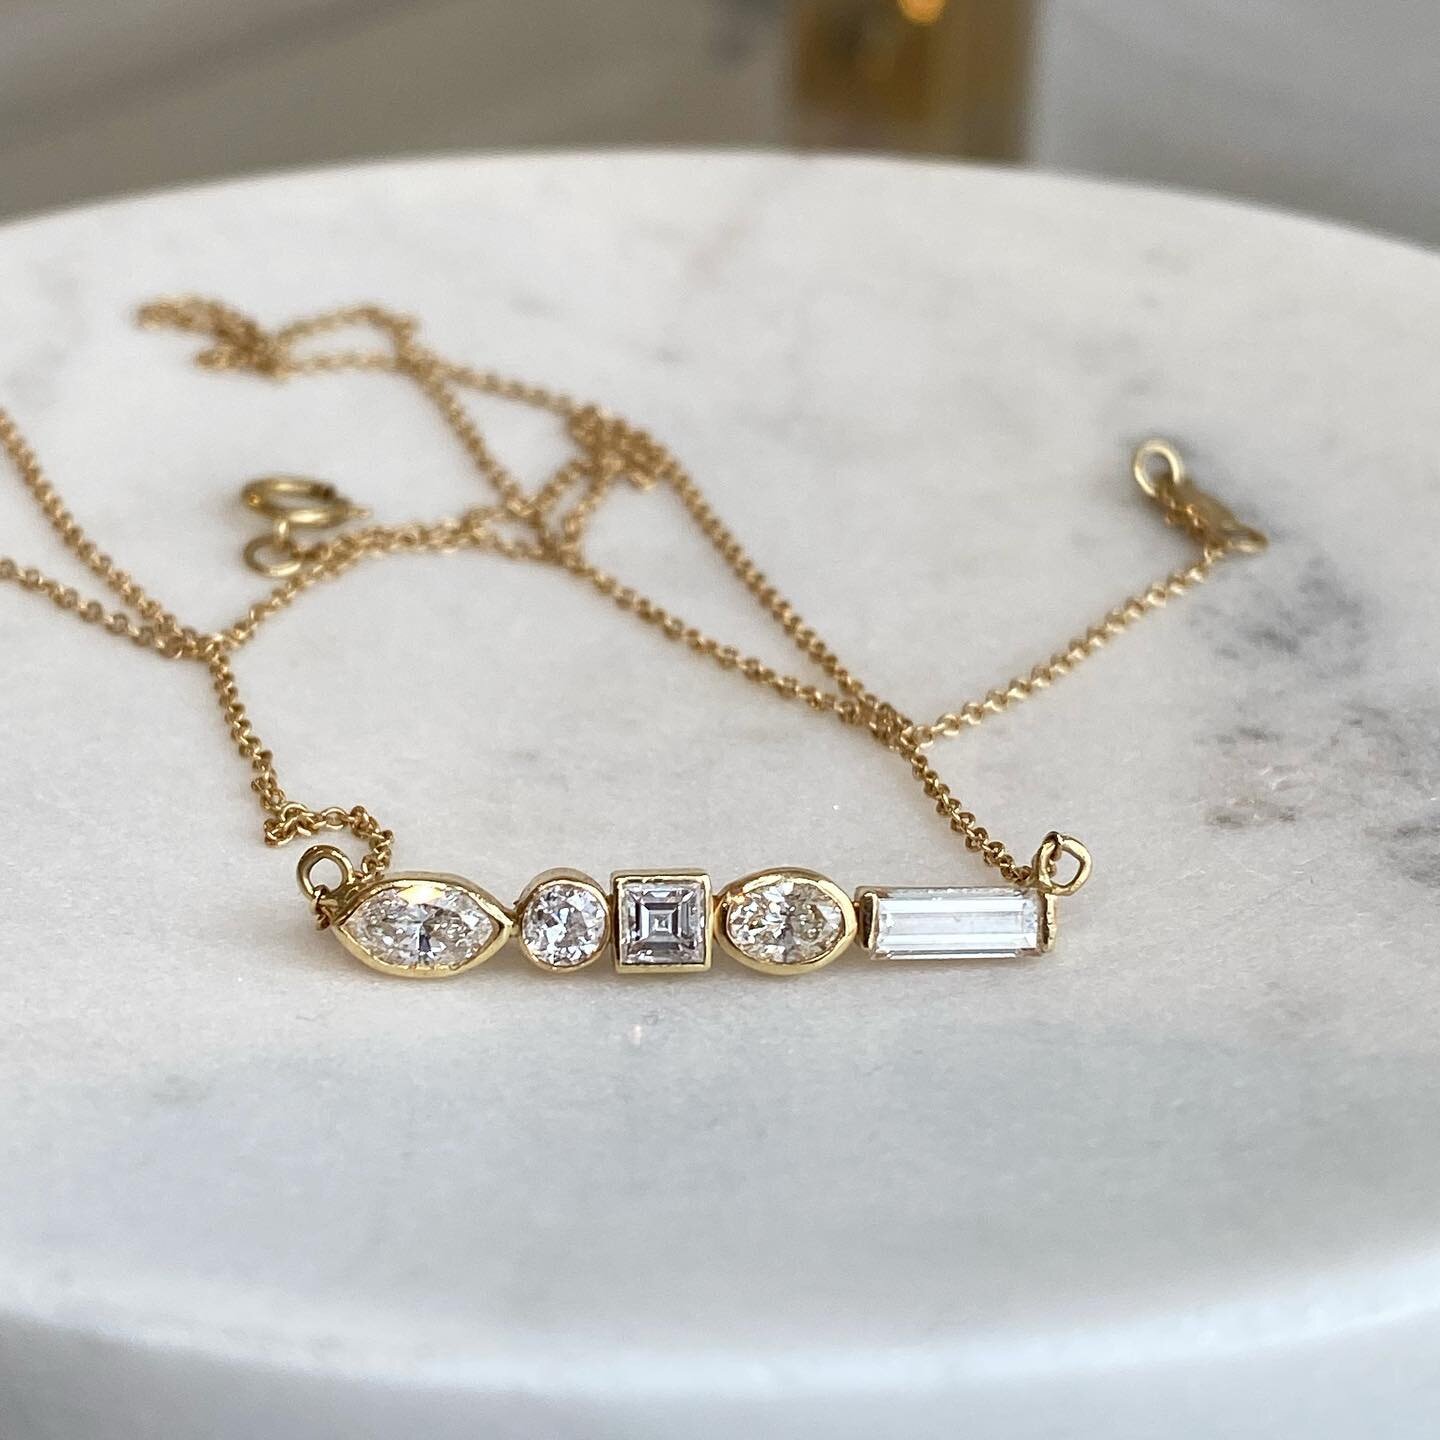 A linear mixed shape diamond necklace I designed long ago ✨thankful it's part of my personal collection 🙌🏻 #jotd #marquise #round #squarestepcut #oval #baguette #diamonds